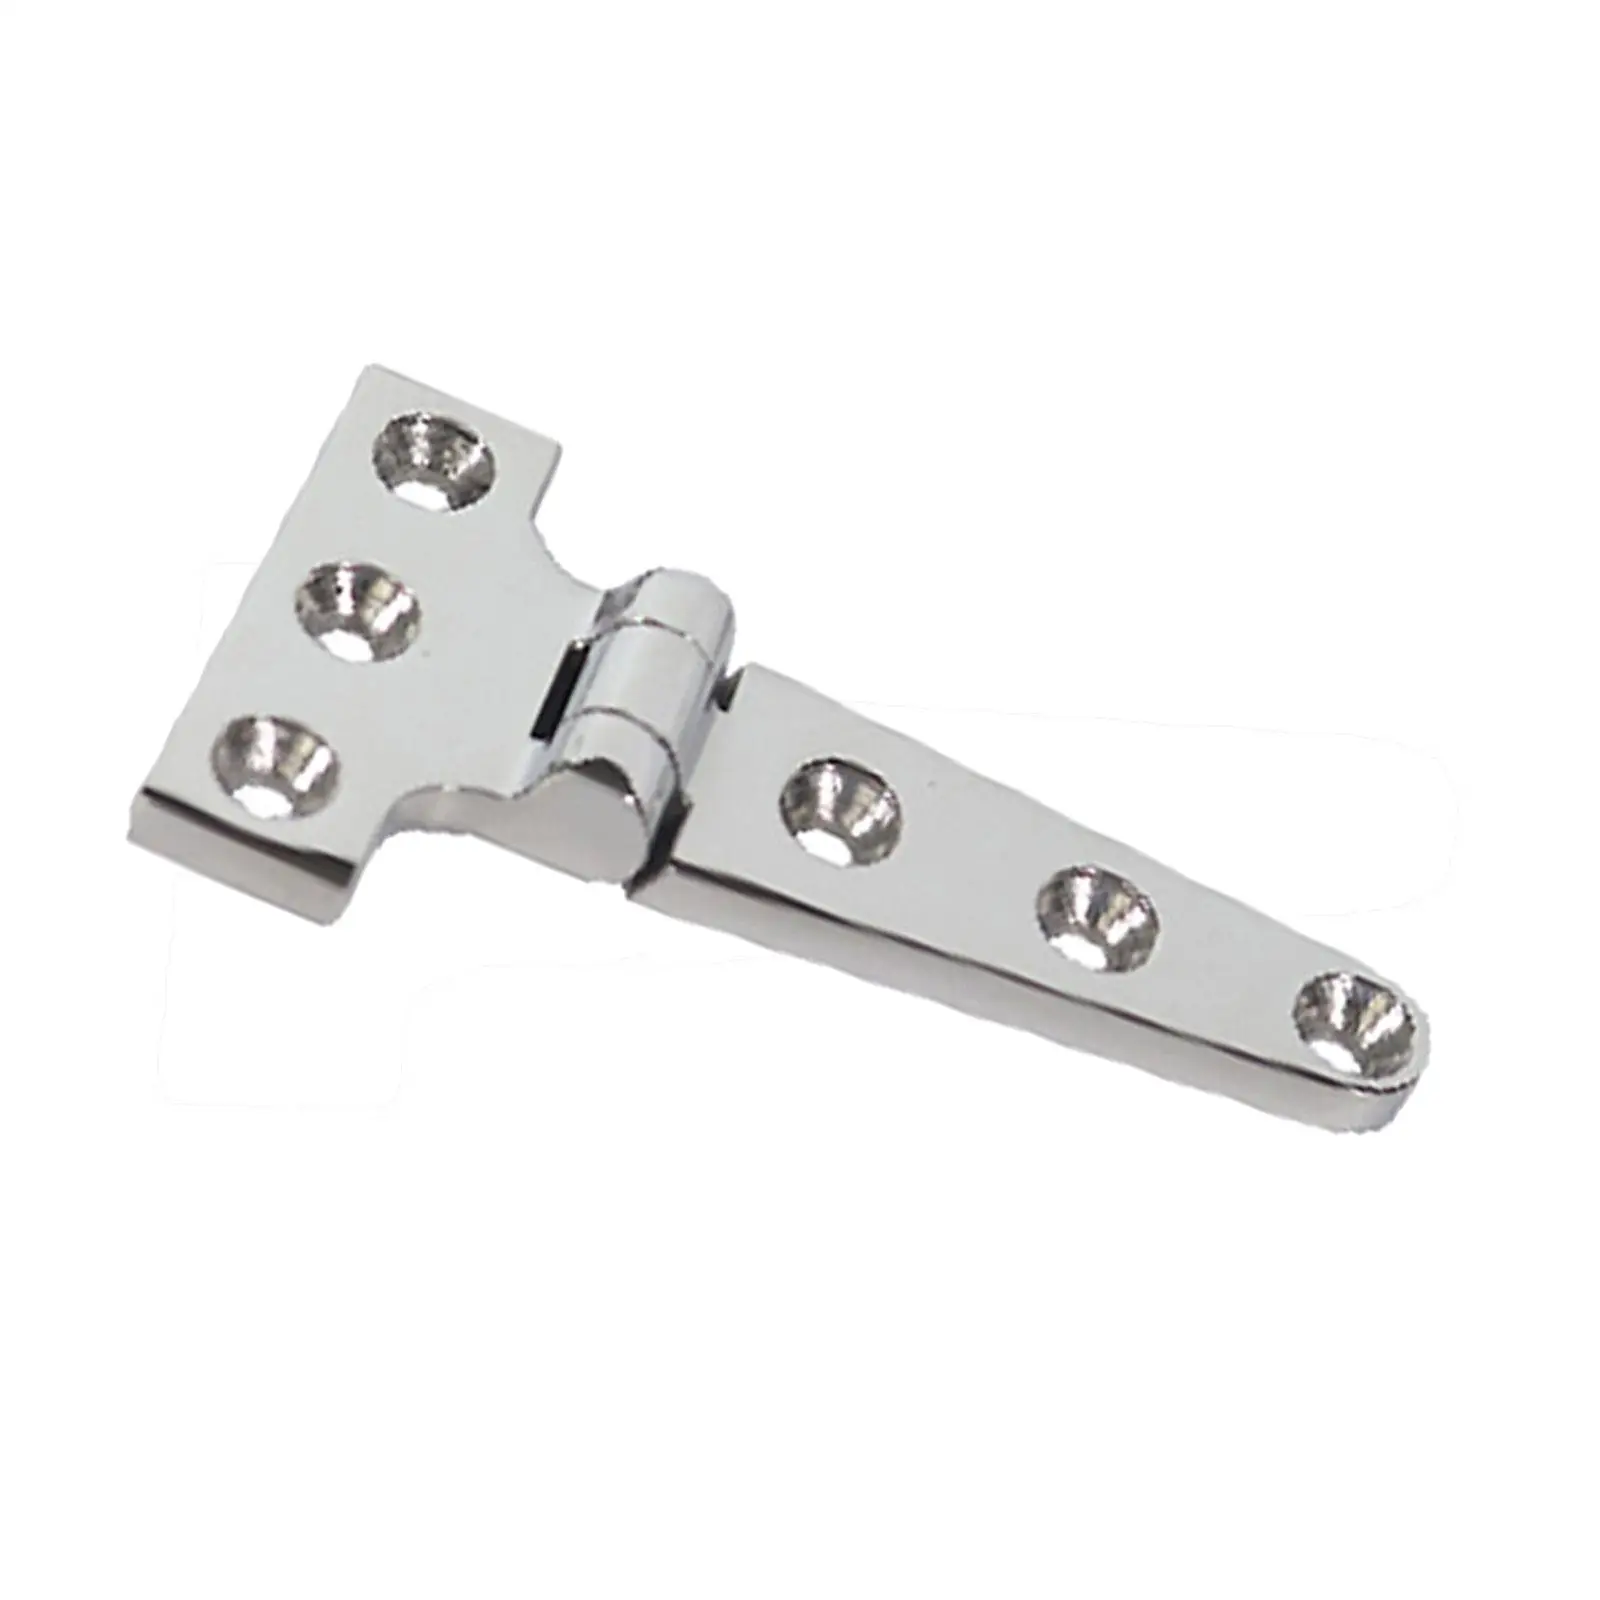 Marine Grade T Hinges 316 Stainless Steel Boat Hinge Easily Install Polished